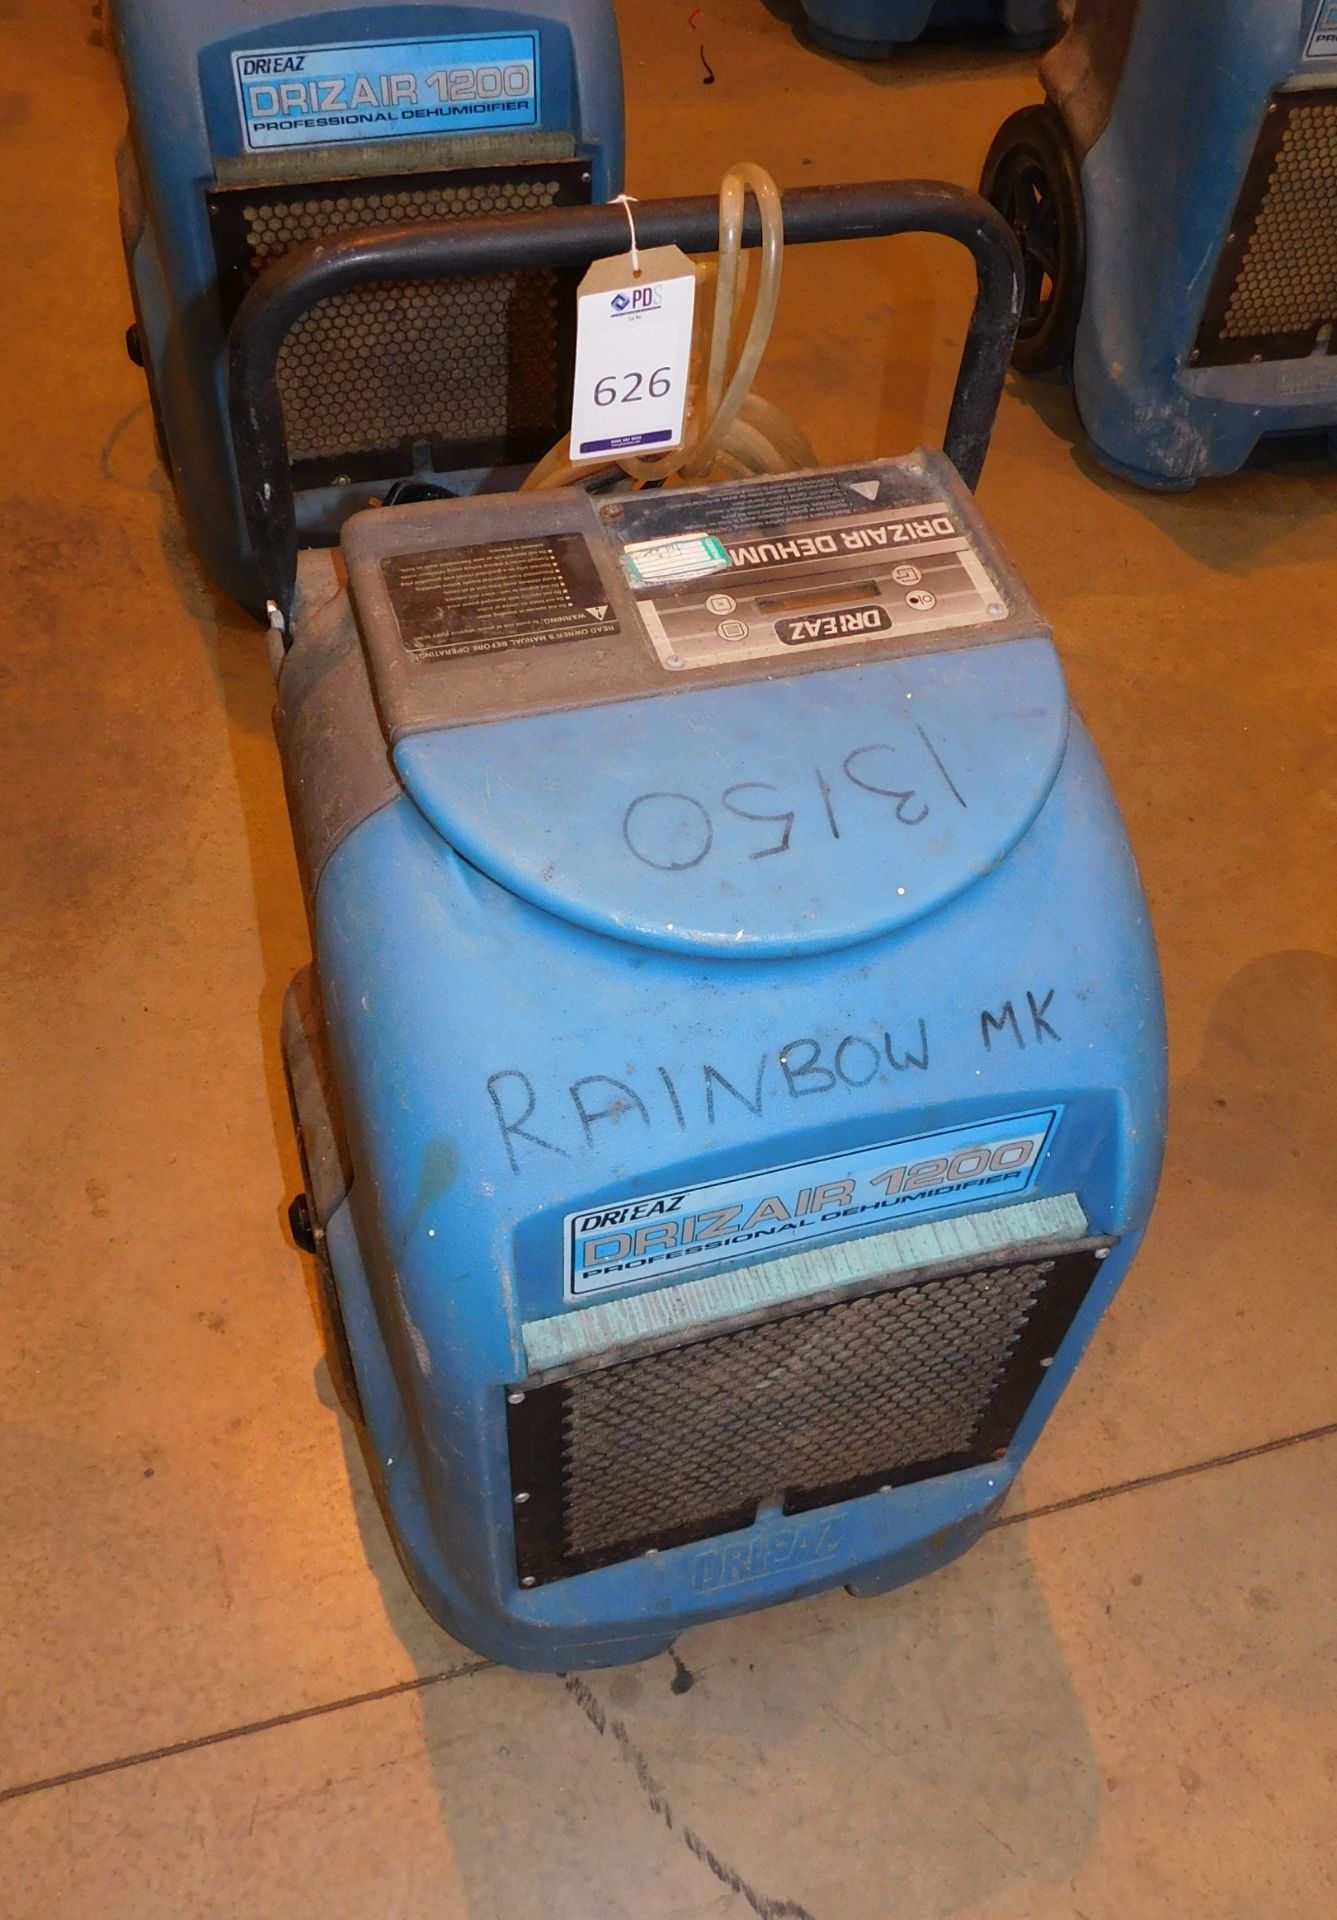 Drieaz Drizair 1200 Professional Dehumidifier (Located Milton Keynes – See General Notes for Viewing